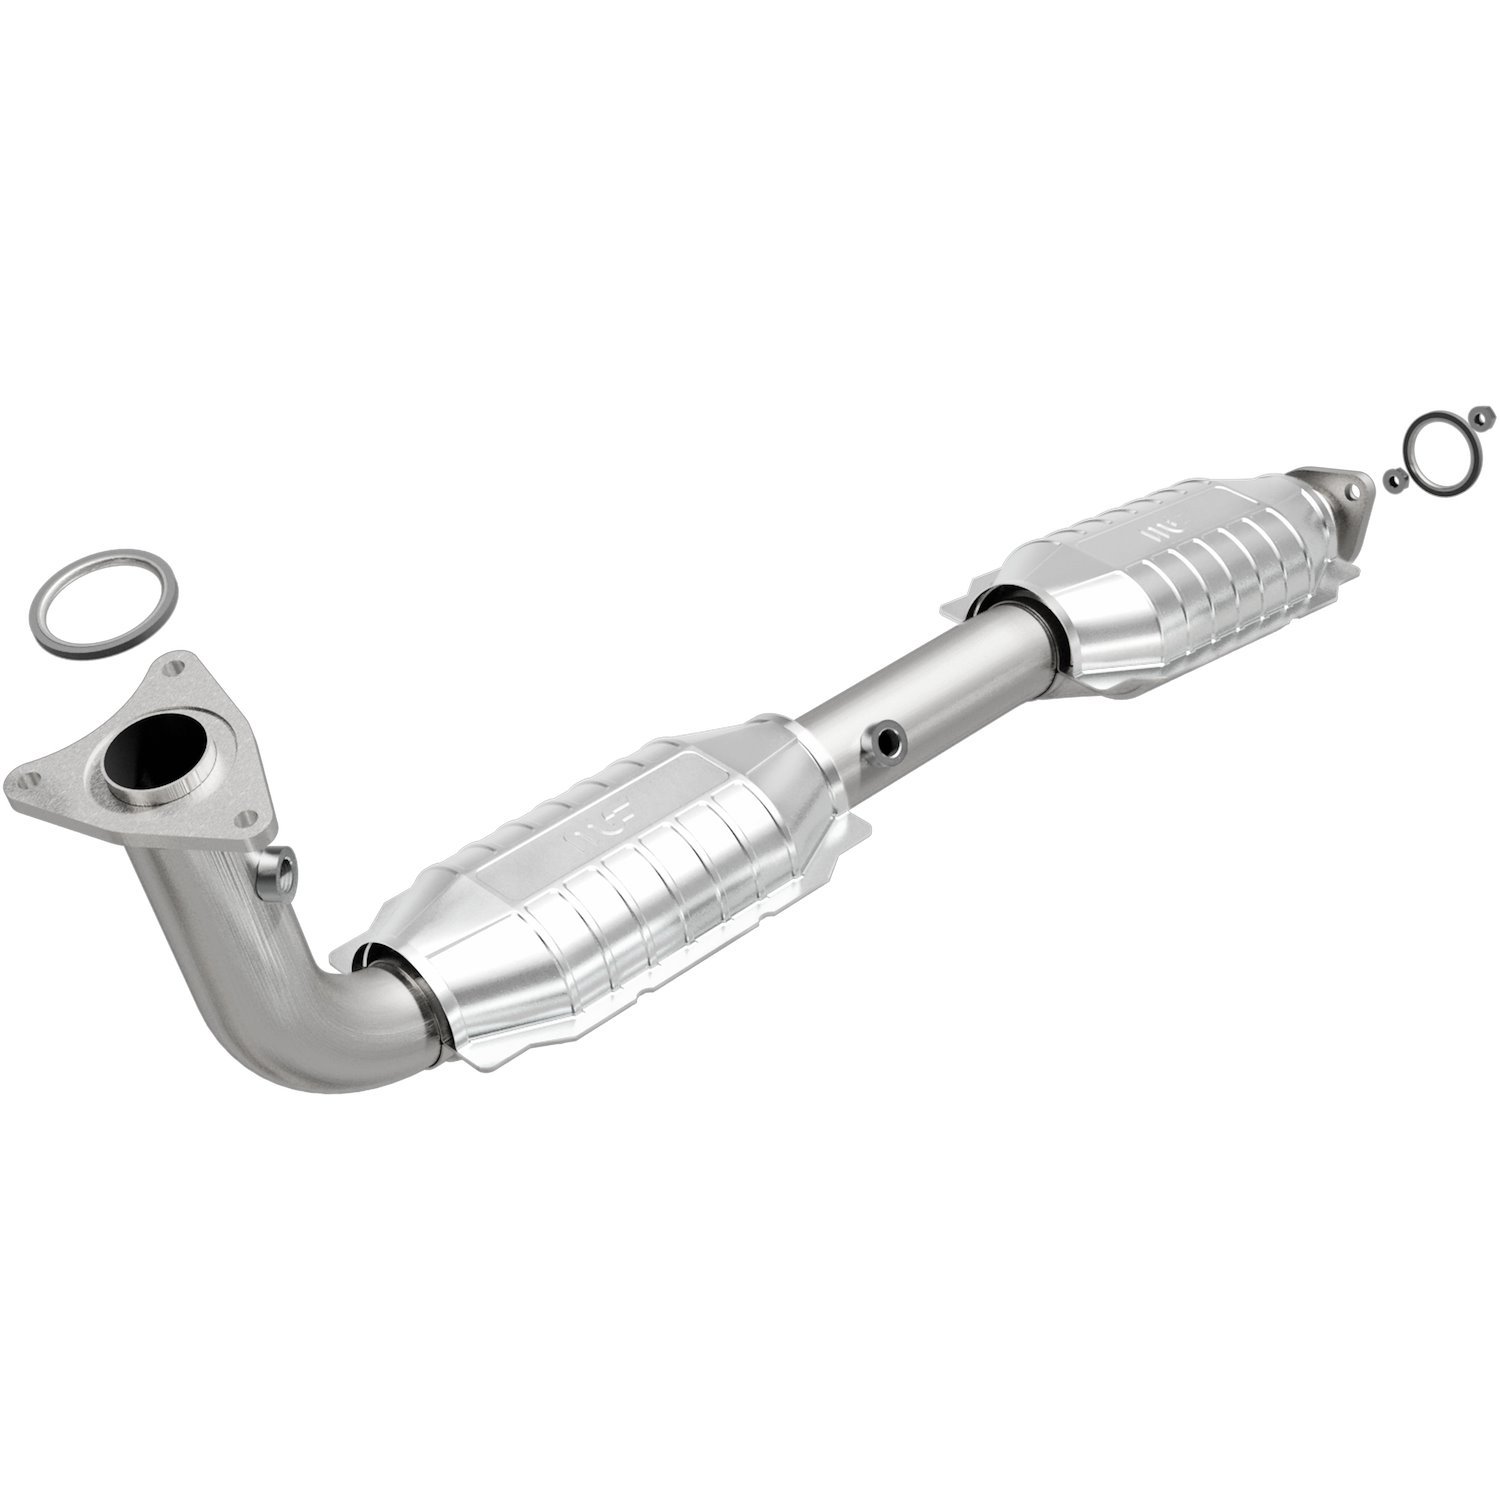 OEM Grade Federal / EPA Compliant Direct-Fit Catalytic Converter 49626